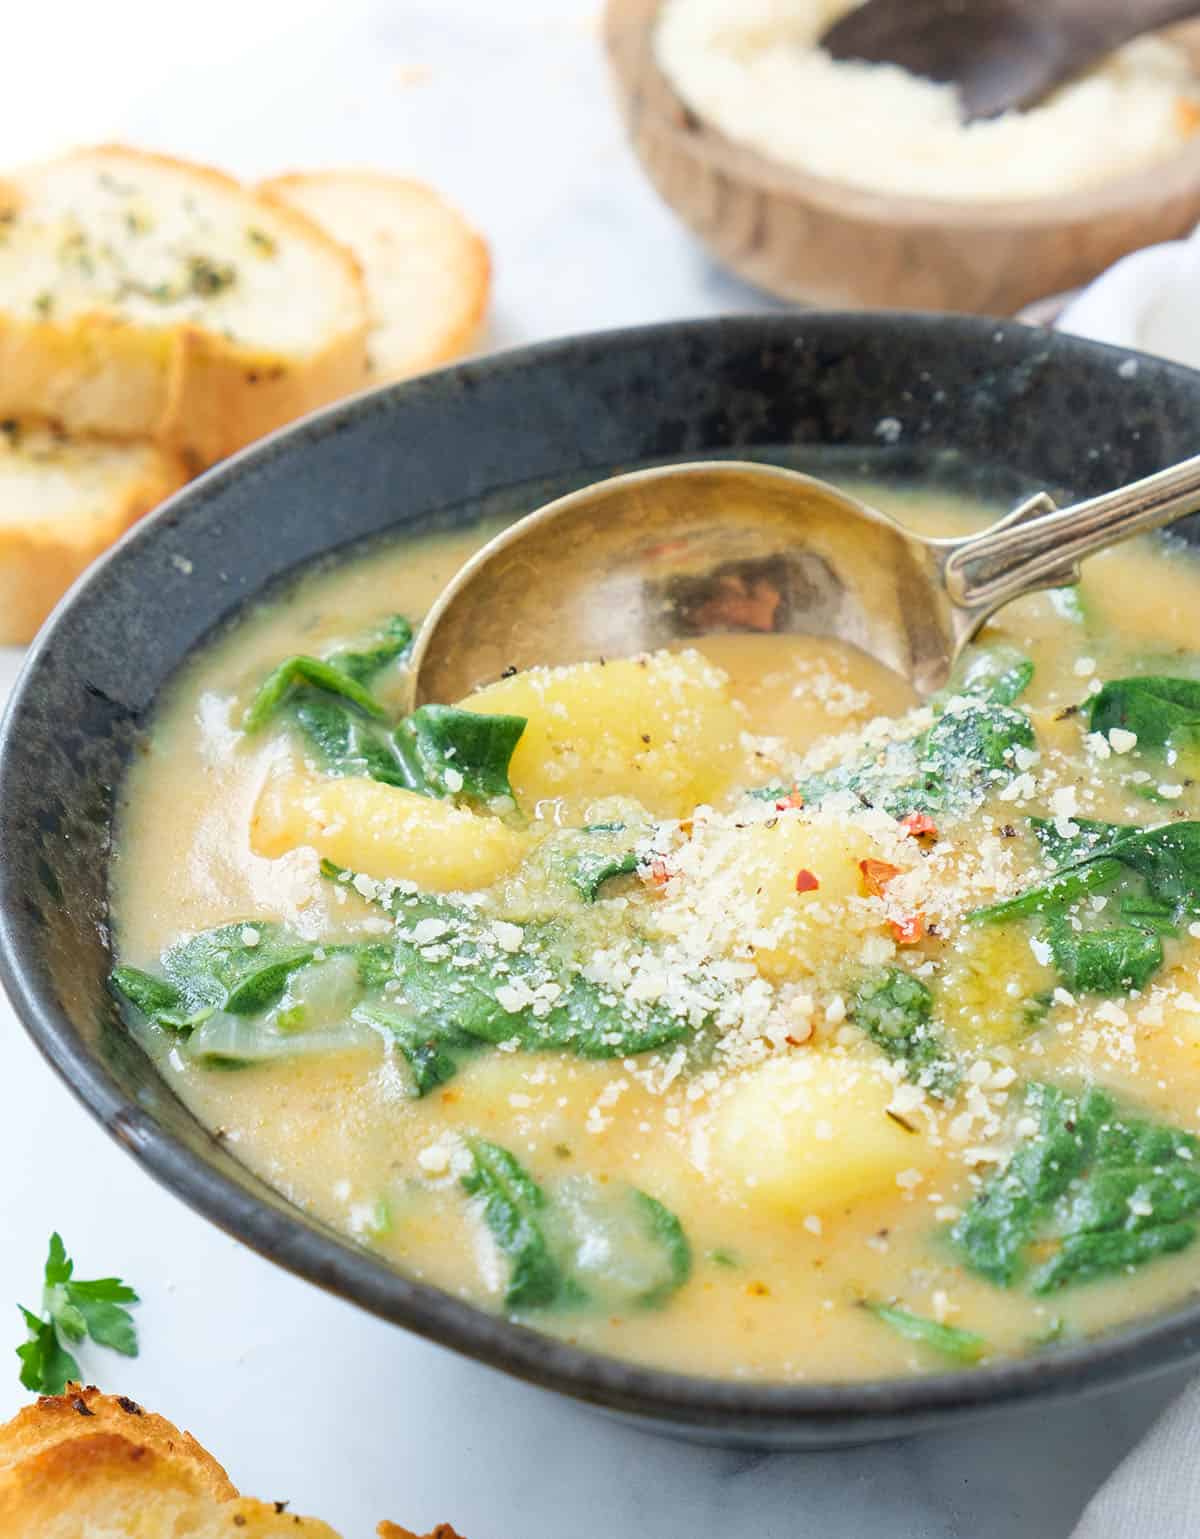 Close-up of a black bowl full of creamy and thick potato spinach soup served with grated parmesan cheese.